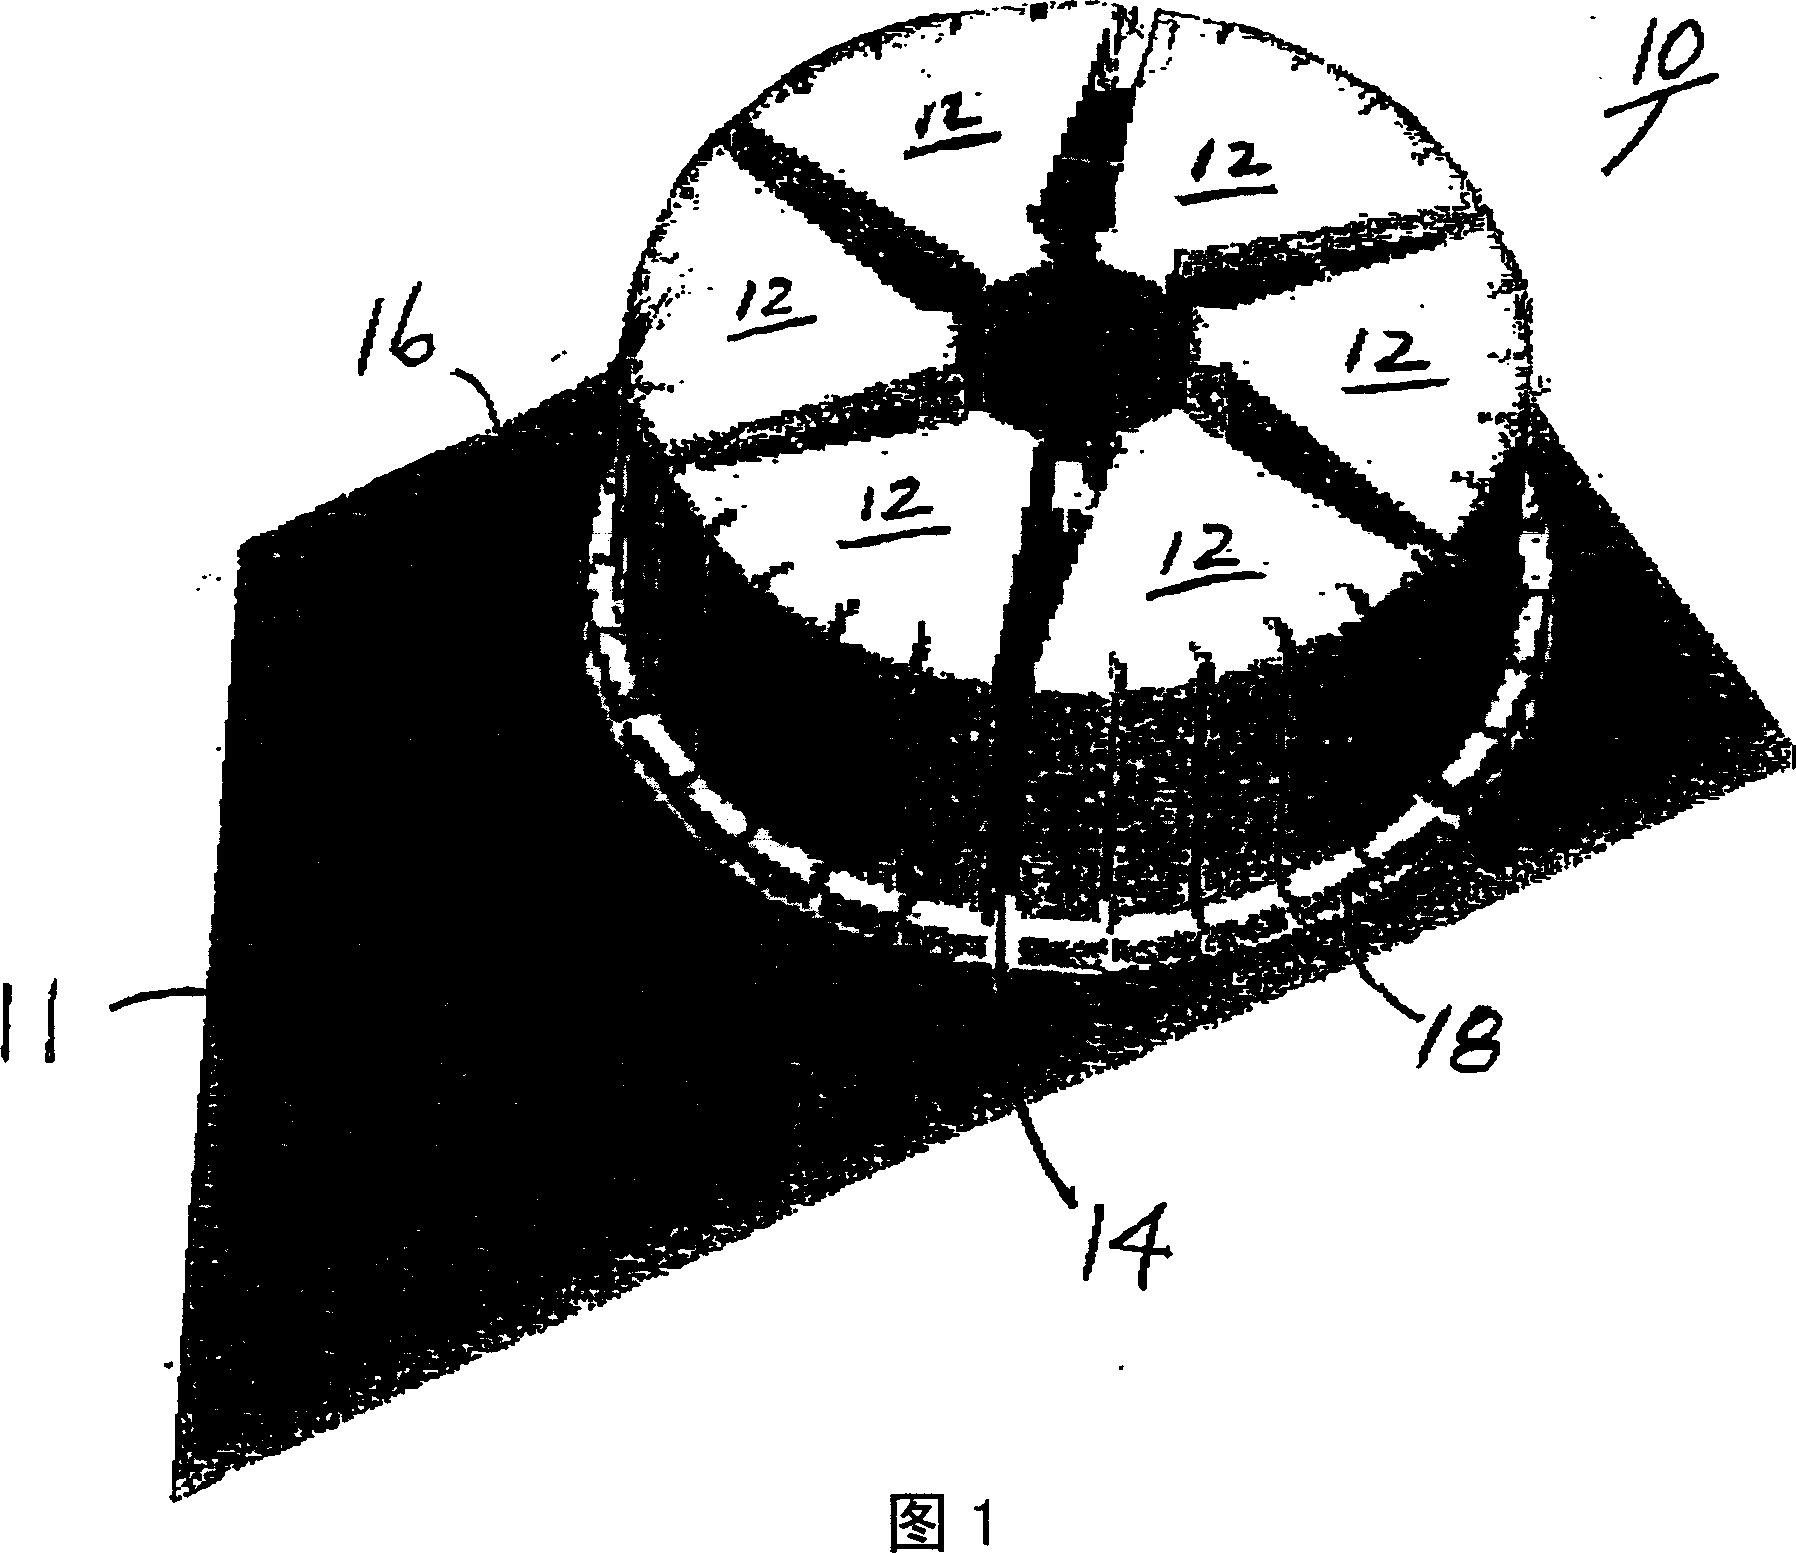 Structure for installing magnetic core winding on service